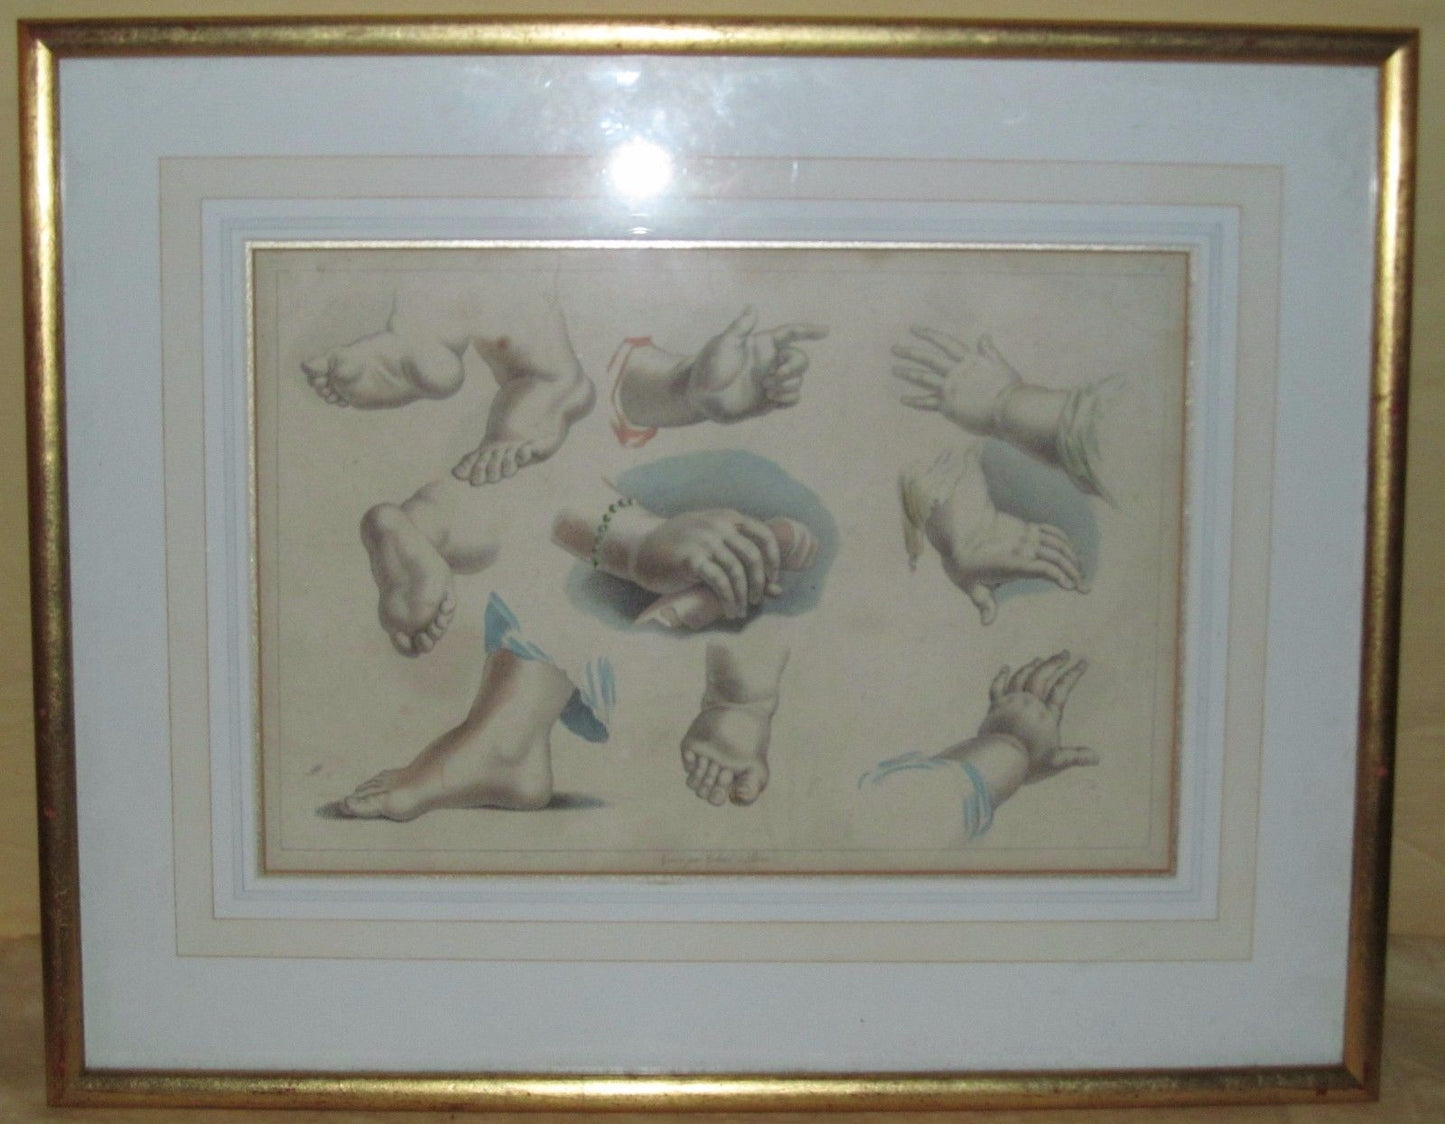 19TH CENTURY ARTIST'S STUDY COLORED LITHOGRAPH